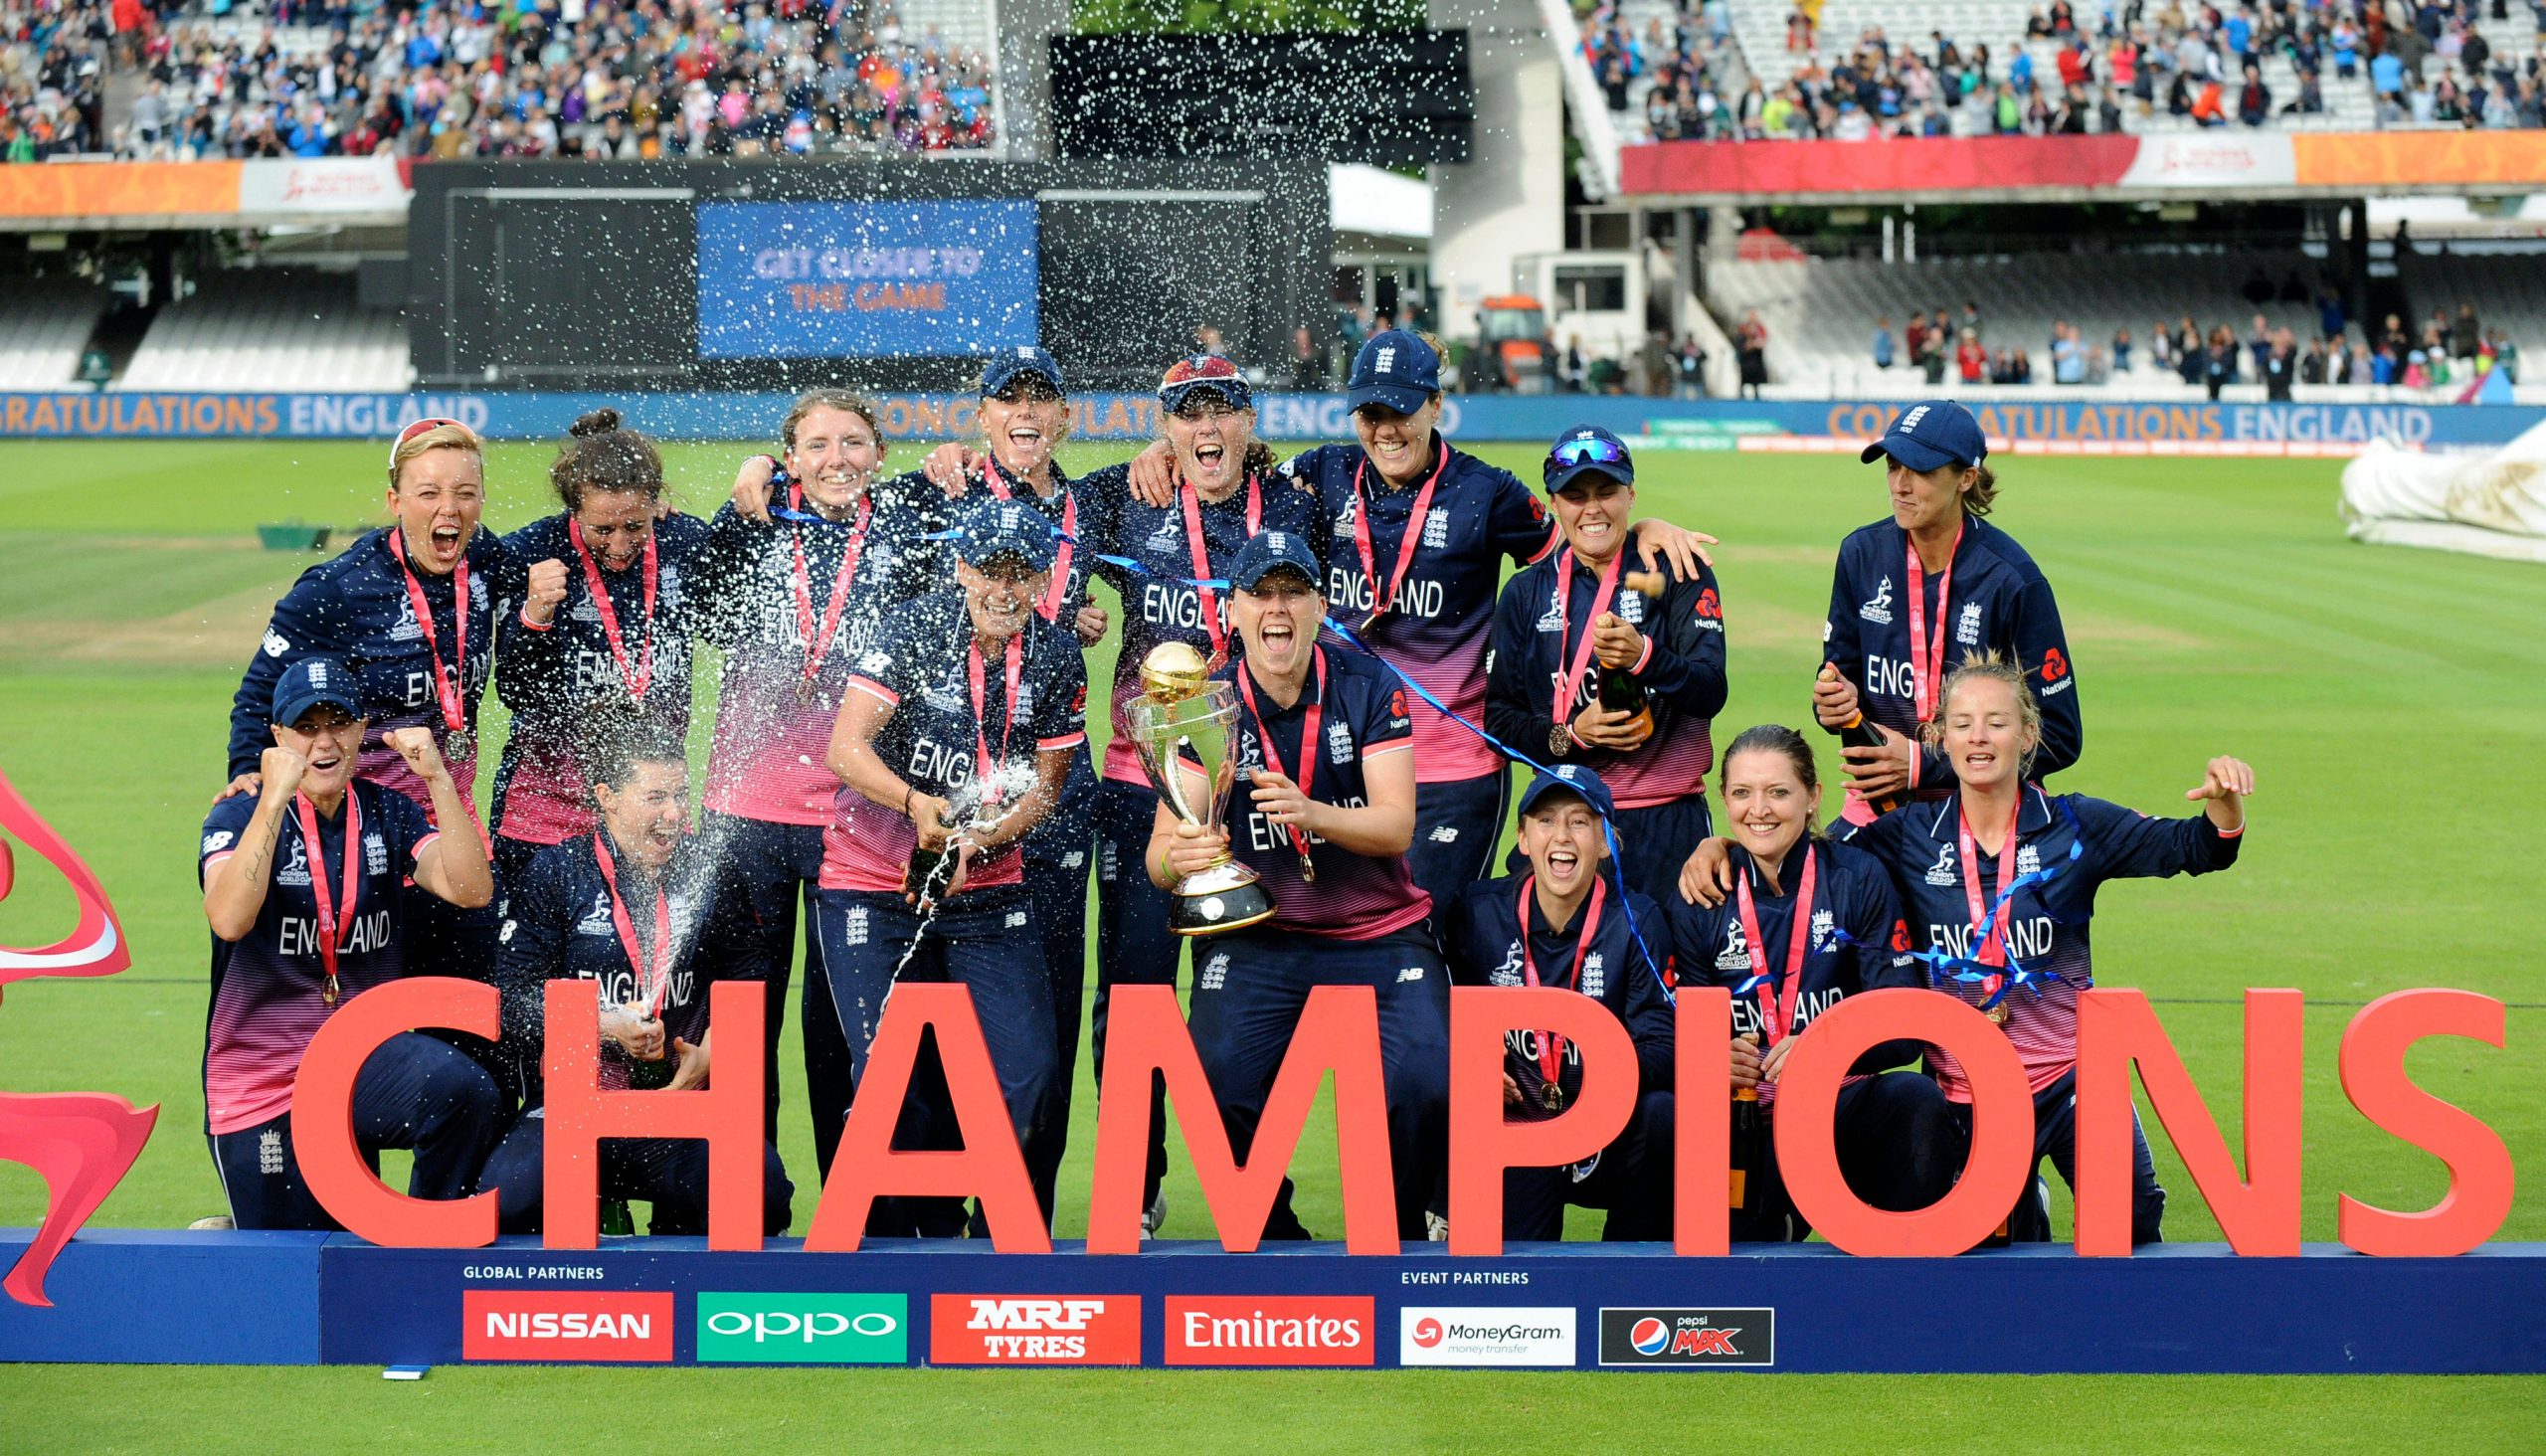 Women’s Cricket World Cup: All about the upcoming championship